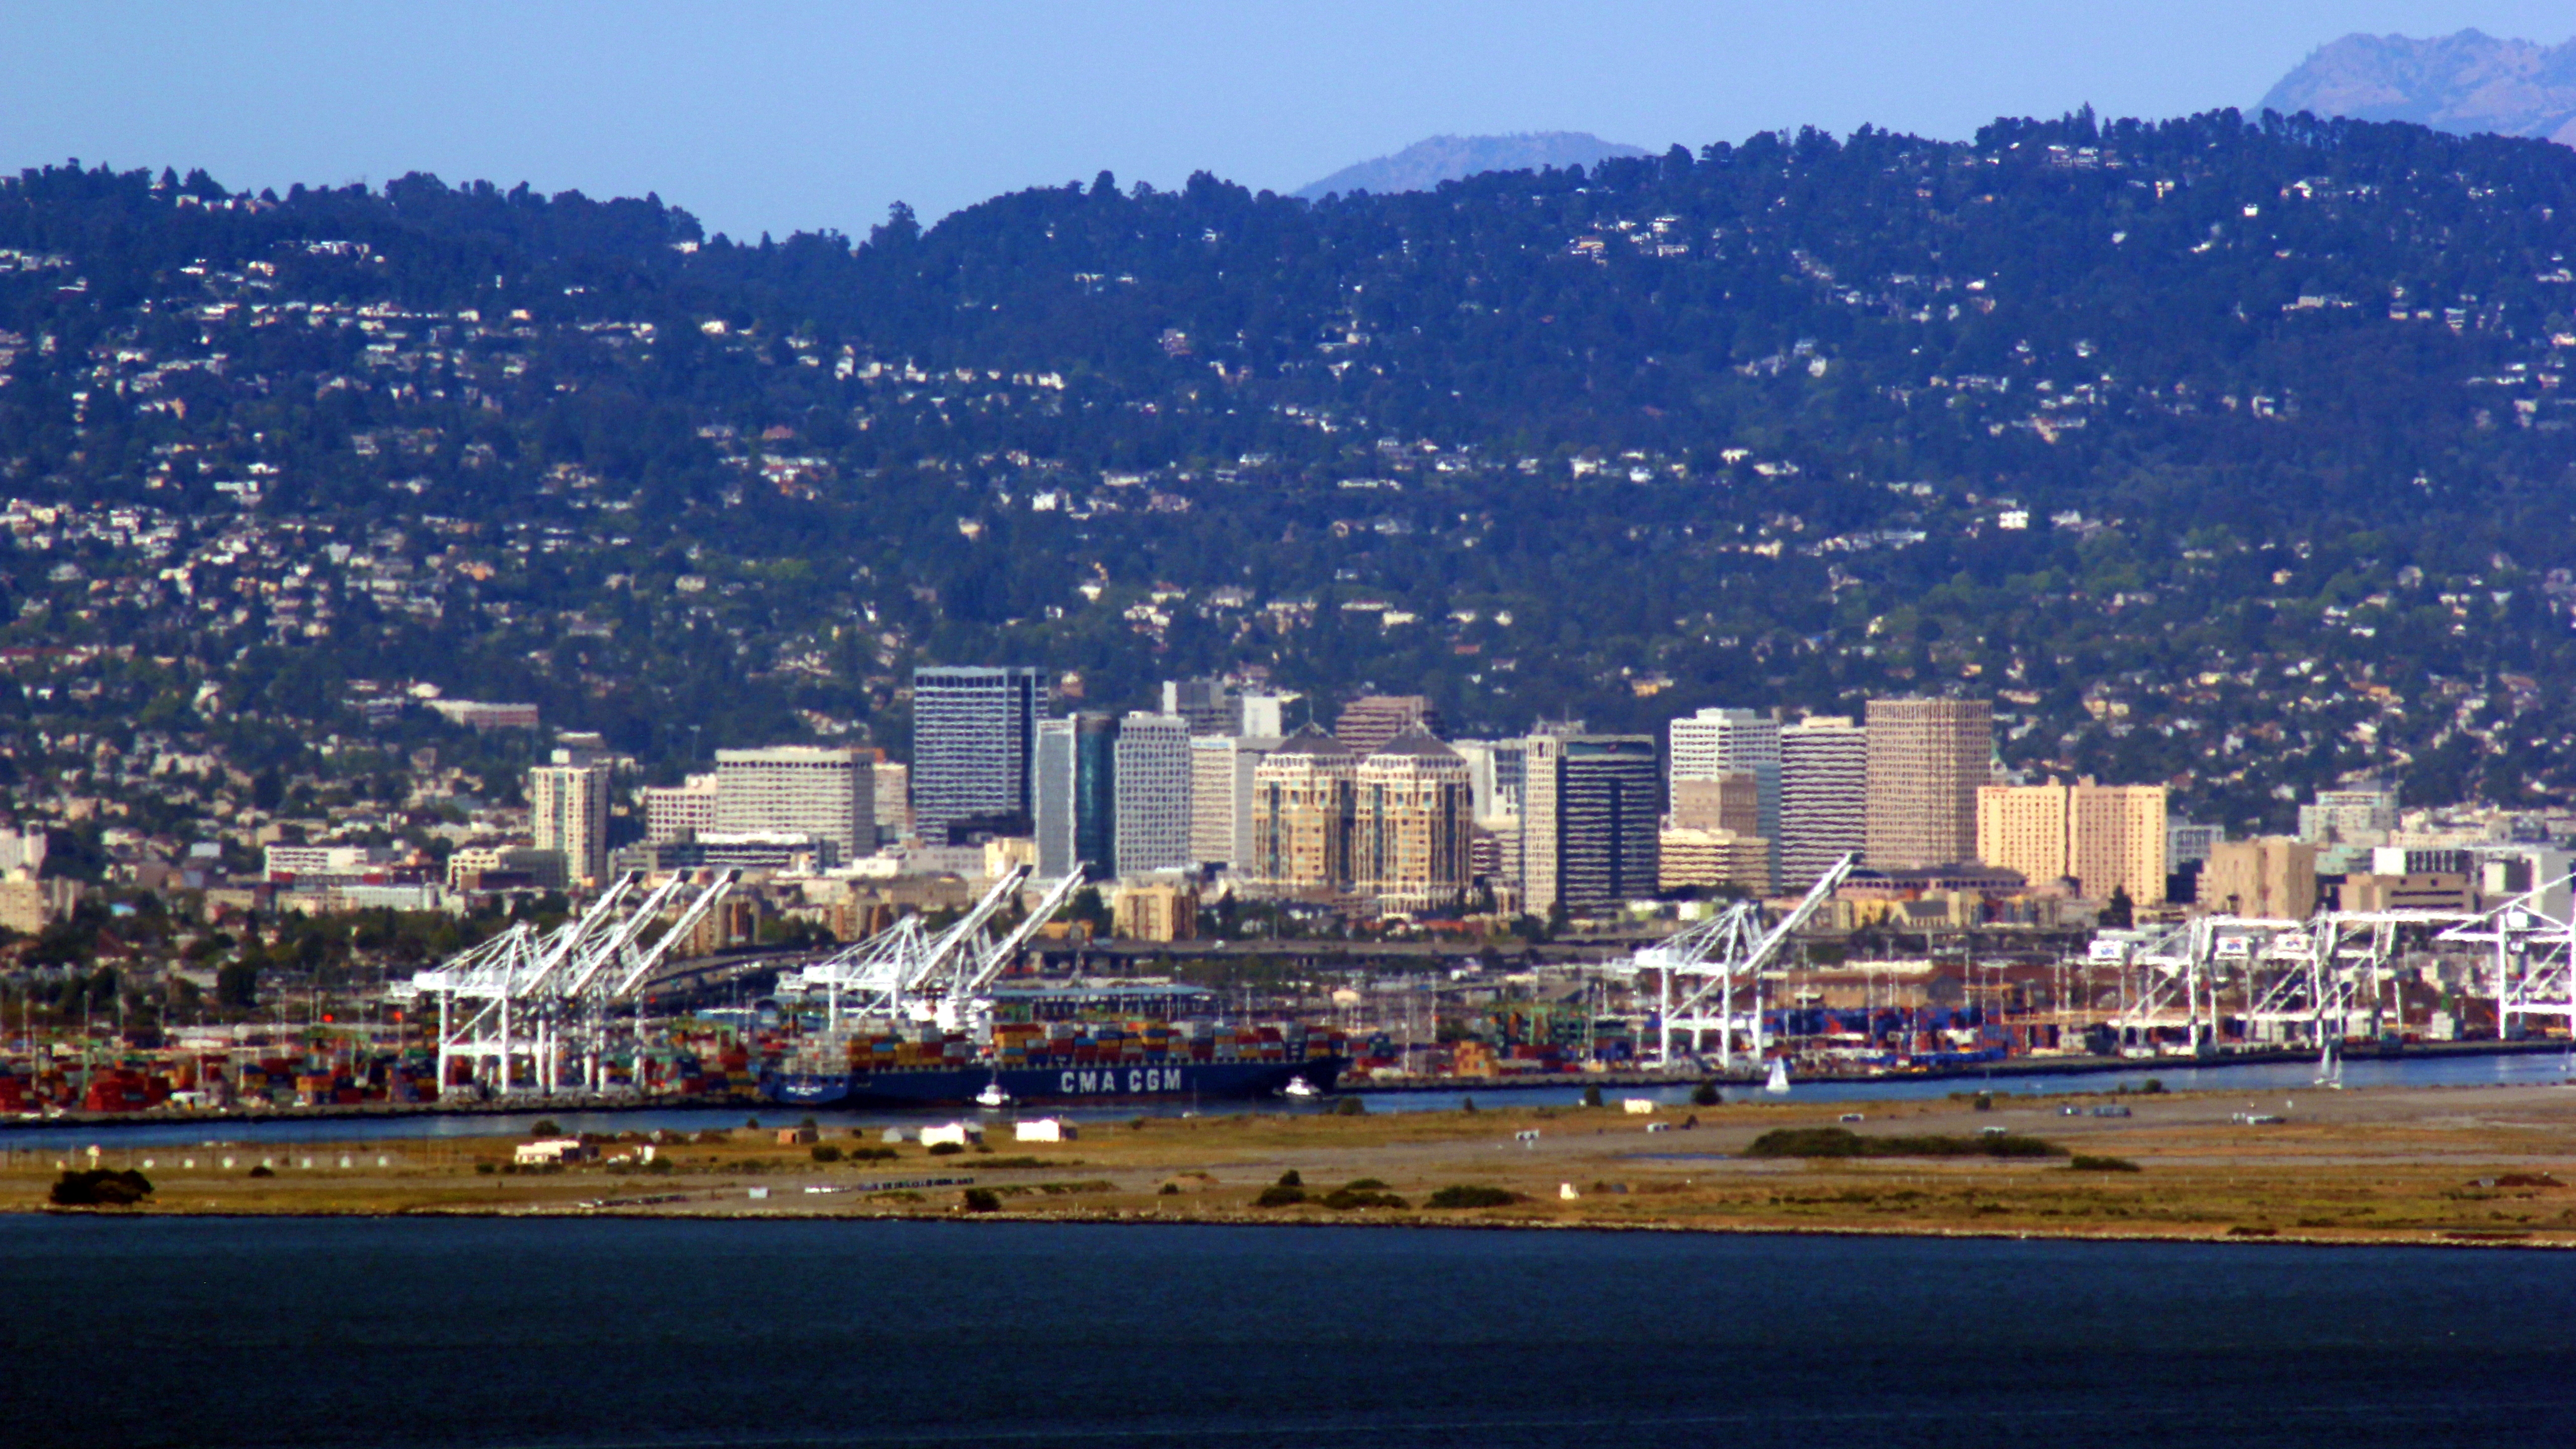 (foreground to background) Port of Oakland, Downtown Oakland skyline, and Oakland hills